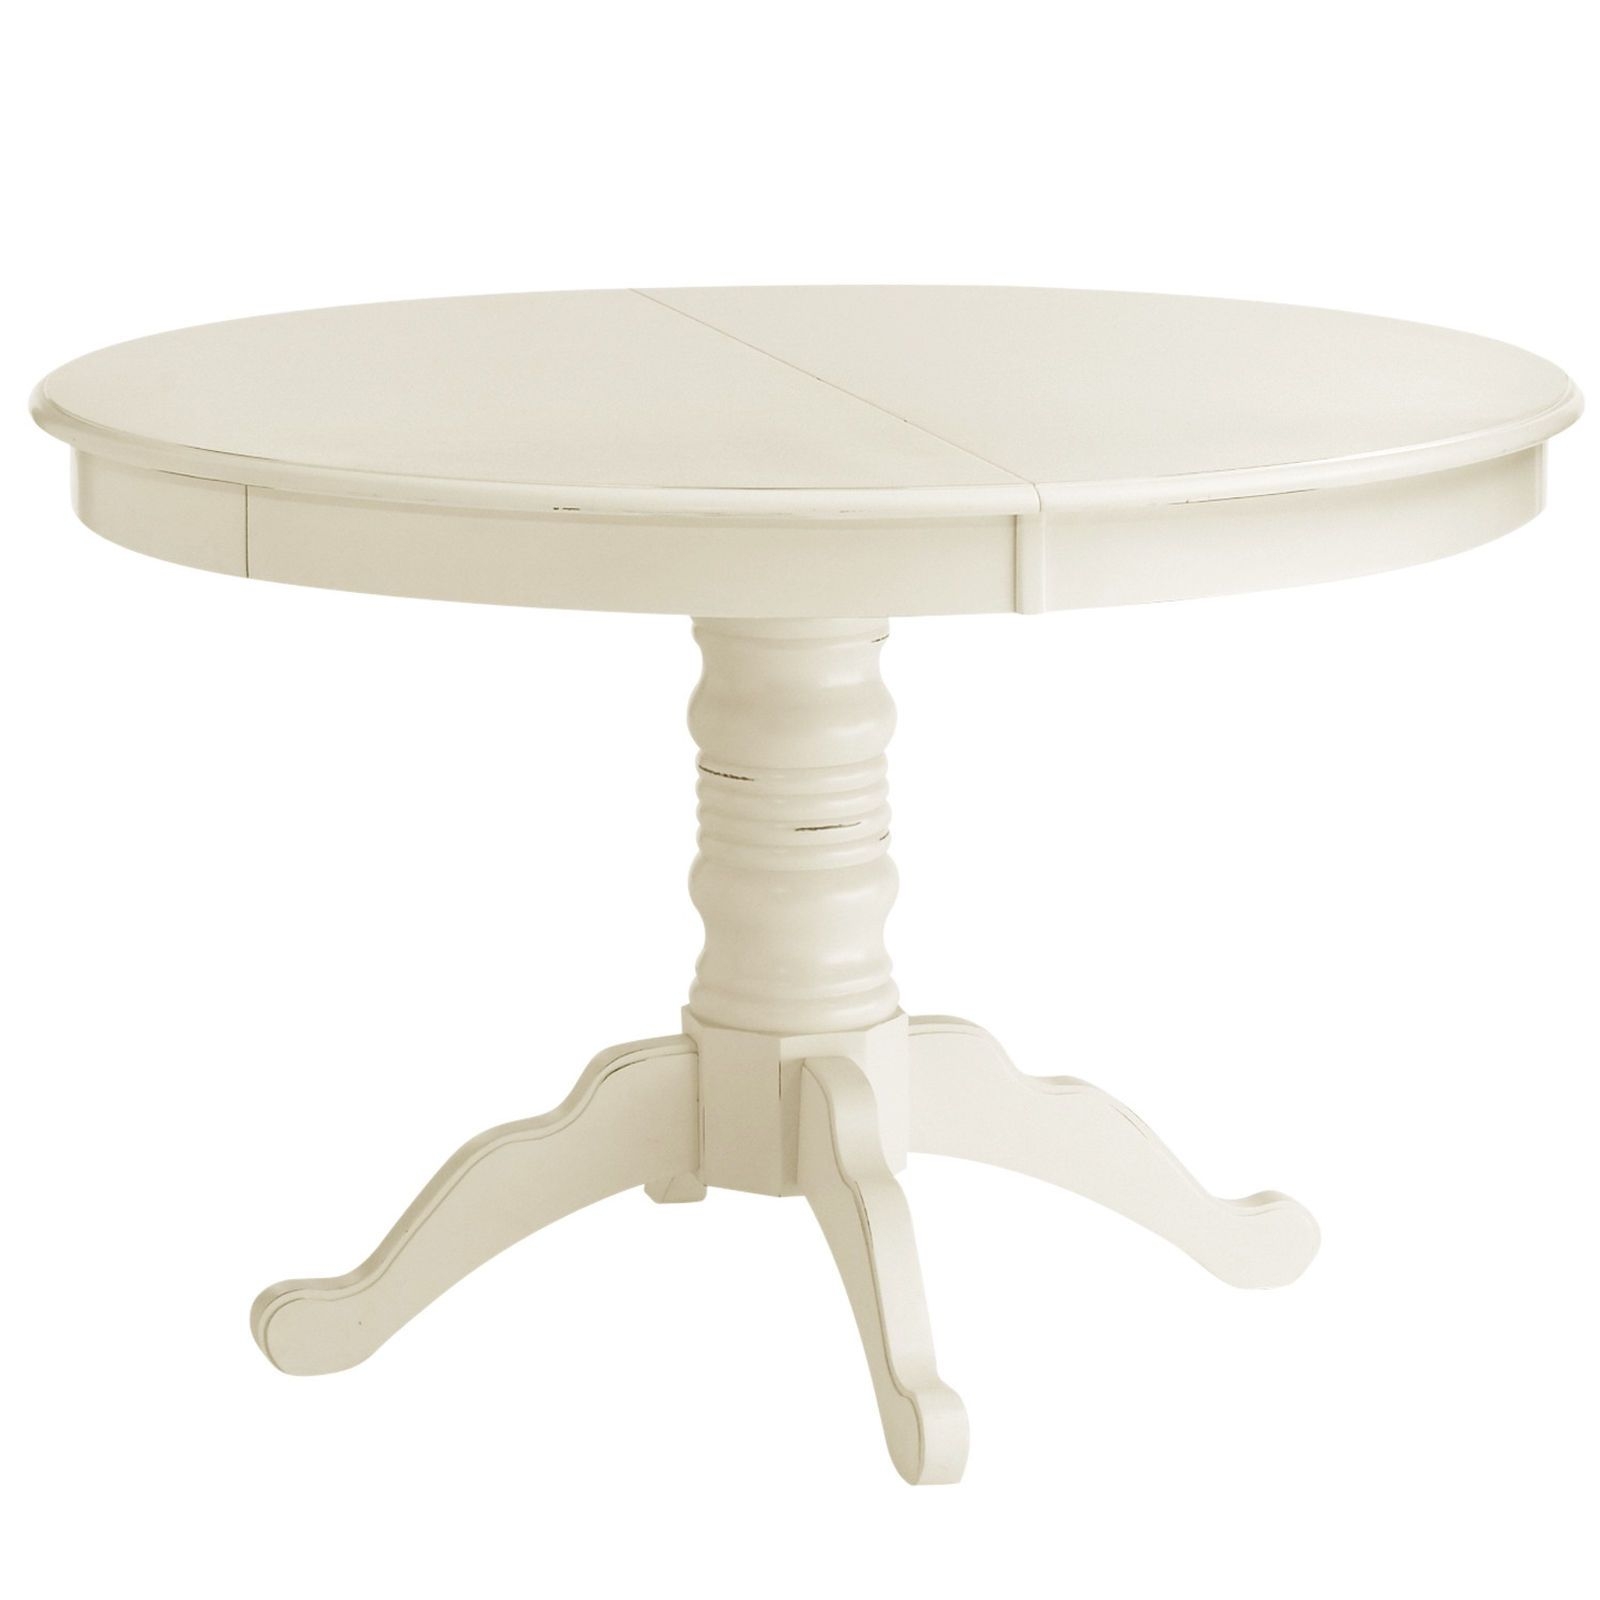 Small round extending dining table